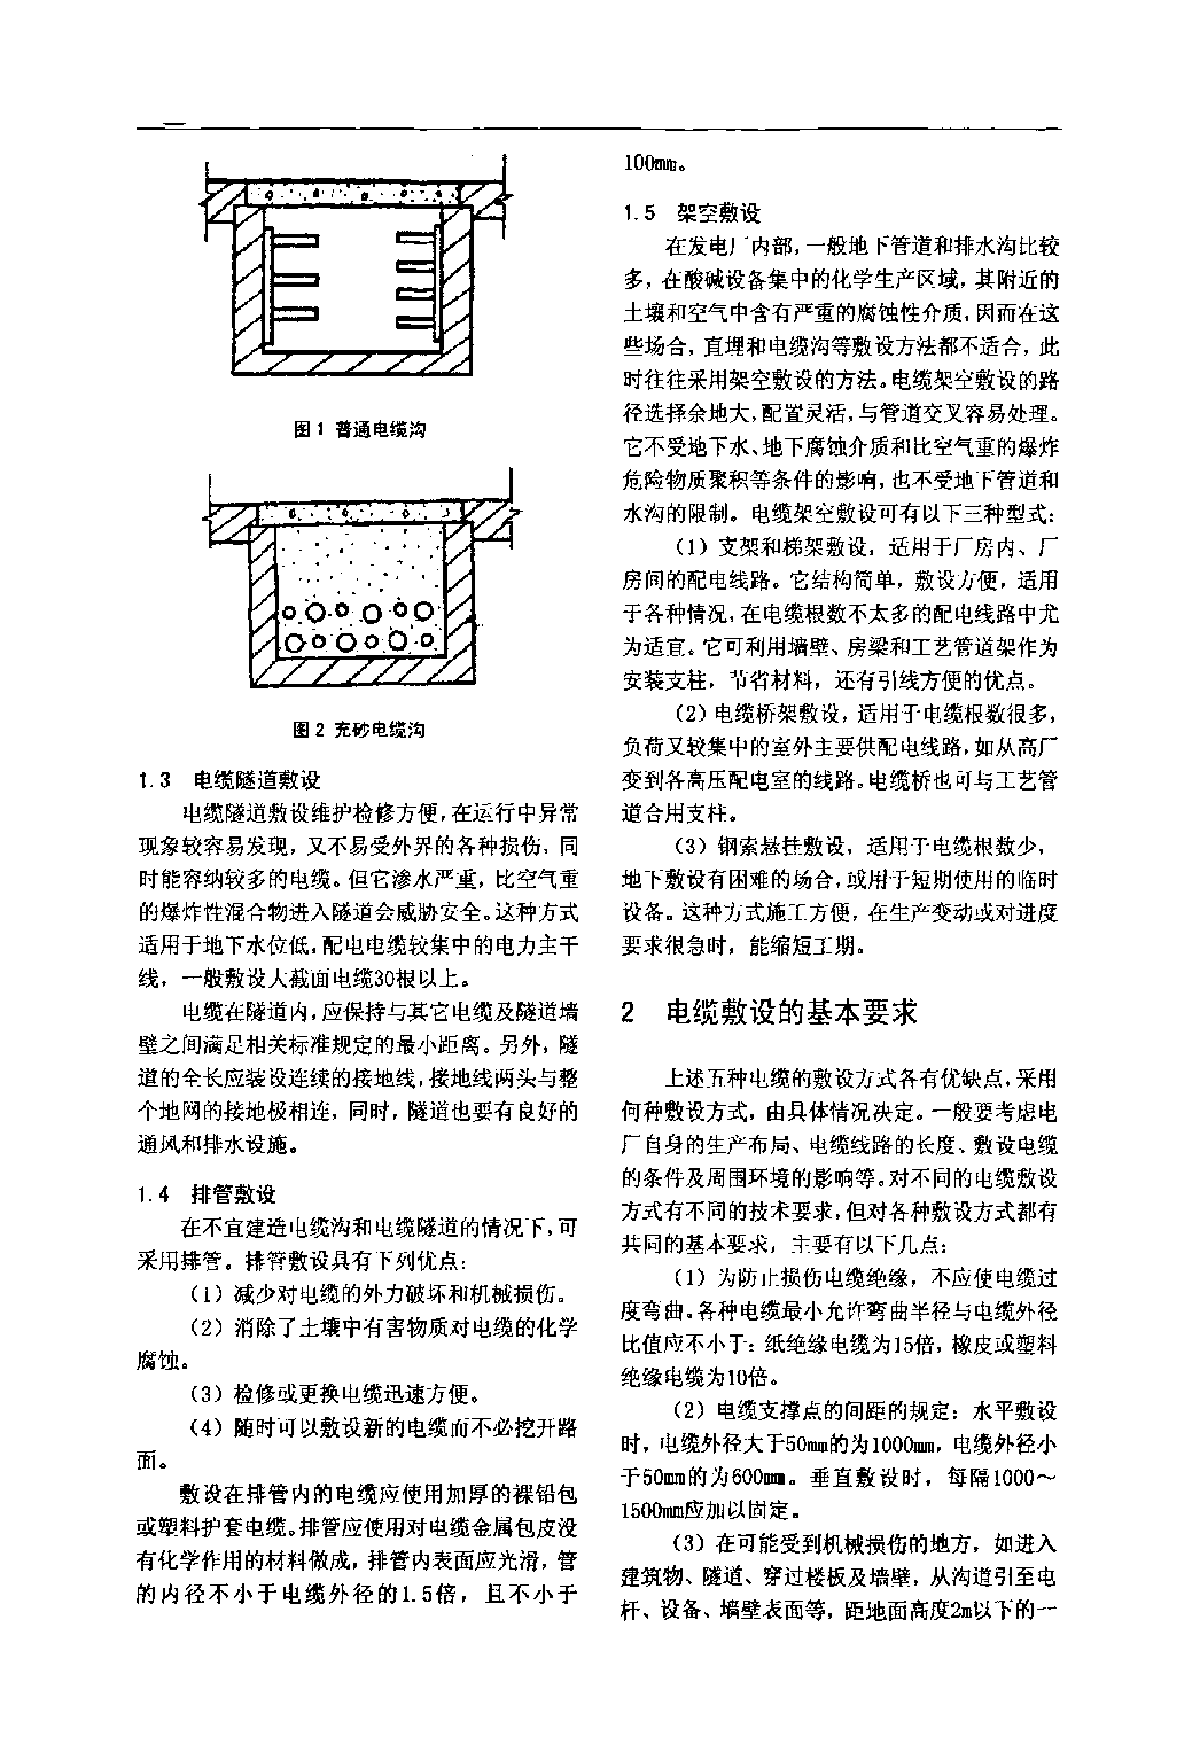  Discussion on cable laying of new power plant - Figure 2